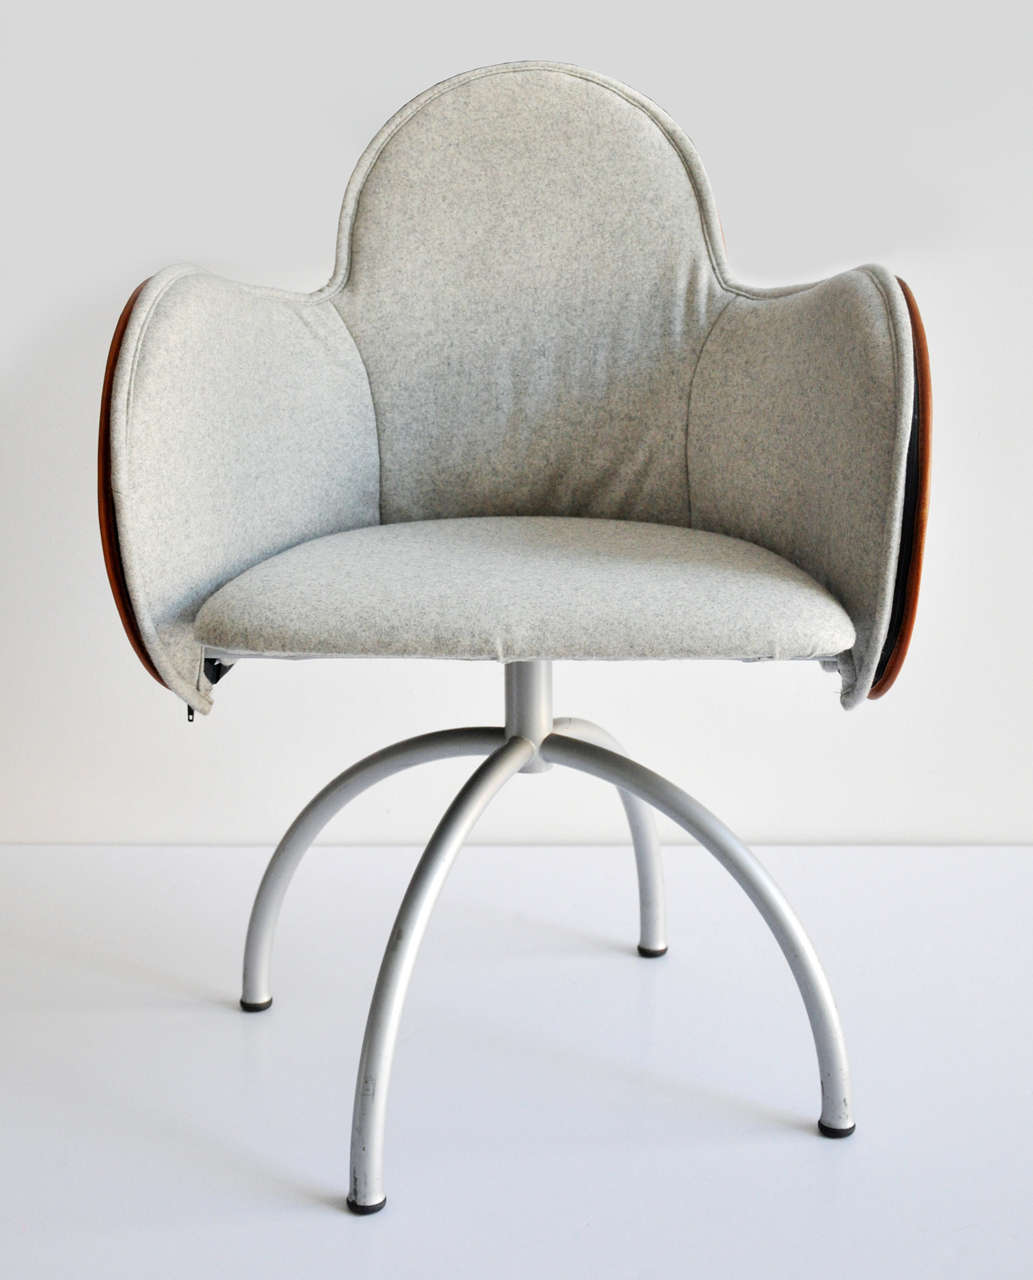 A beautiful example of Magistretti's Incisa swivel armchair, designed in 1992 for De Padova. The recipient of many awards including the Compasso d'Oro in 1967 and 1979 and the Gold Medal of the SIAD (Society of Industrial Artists & Designers) in